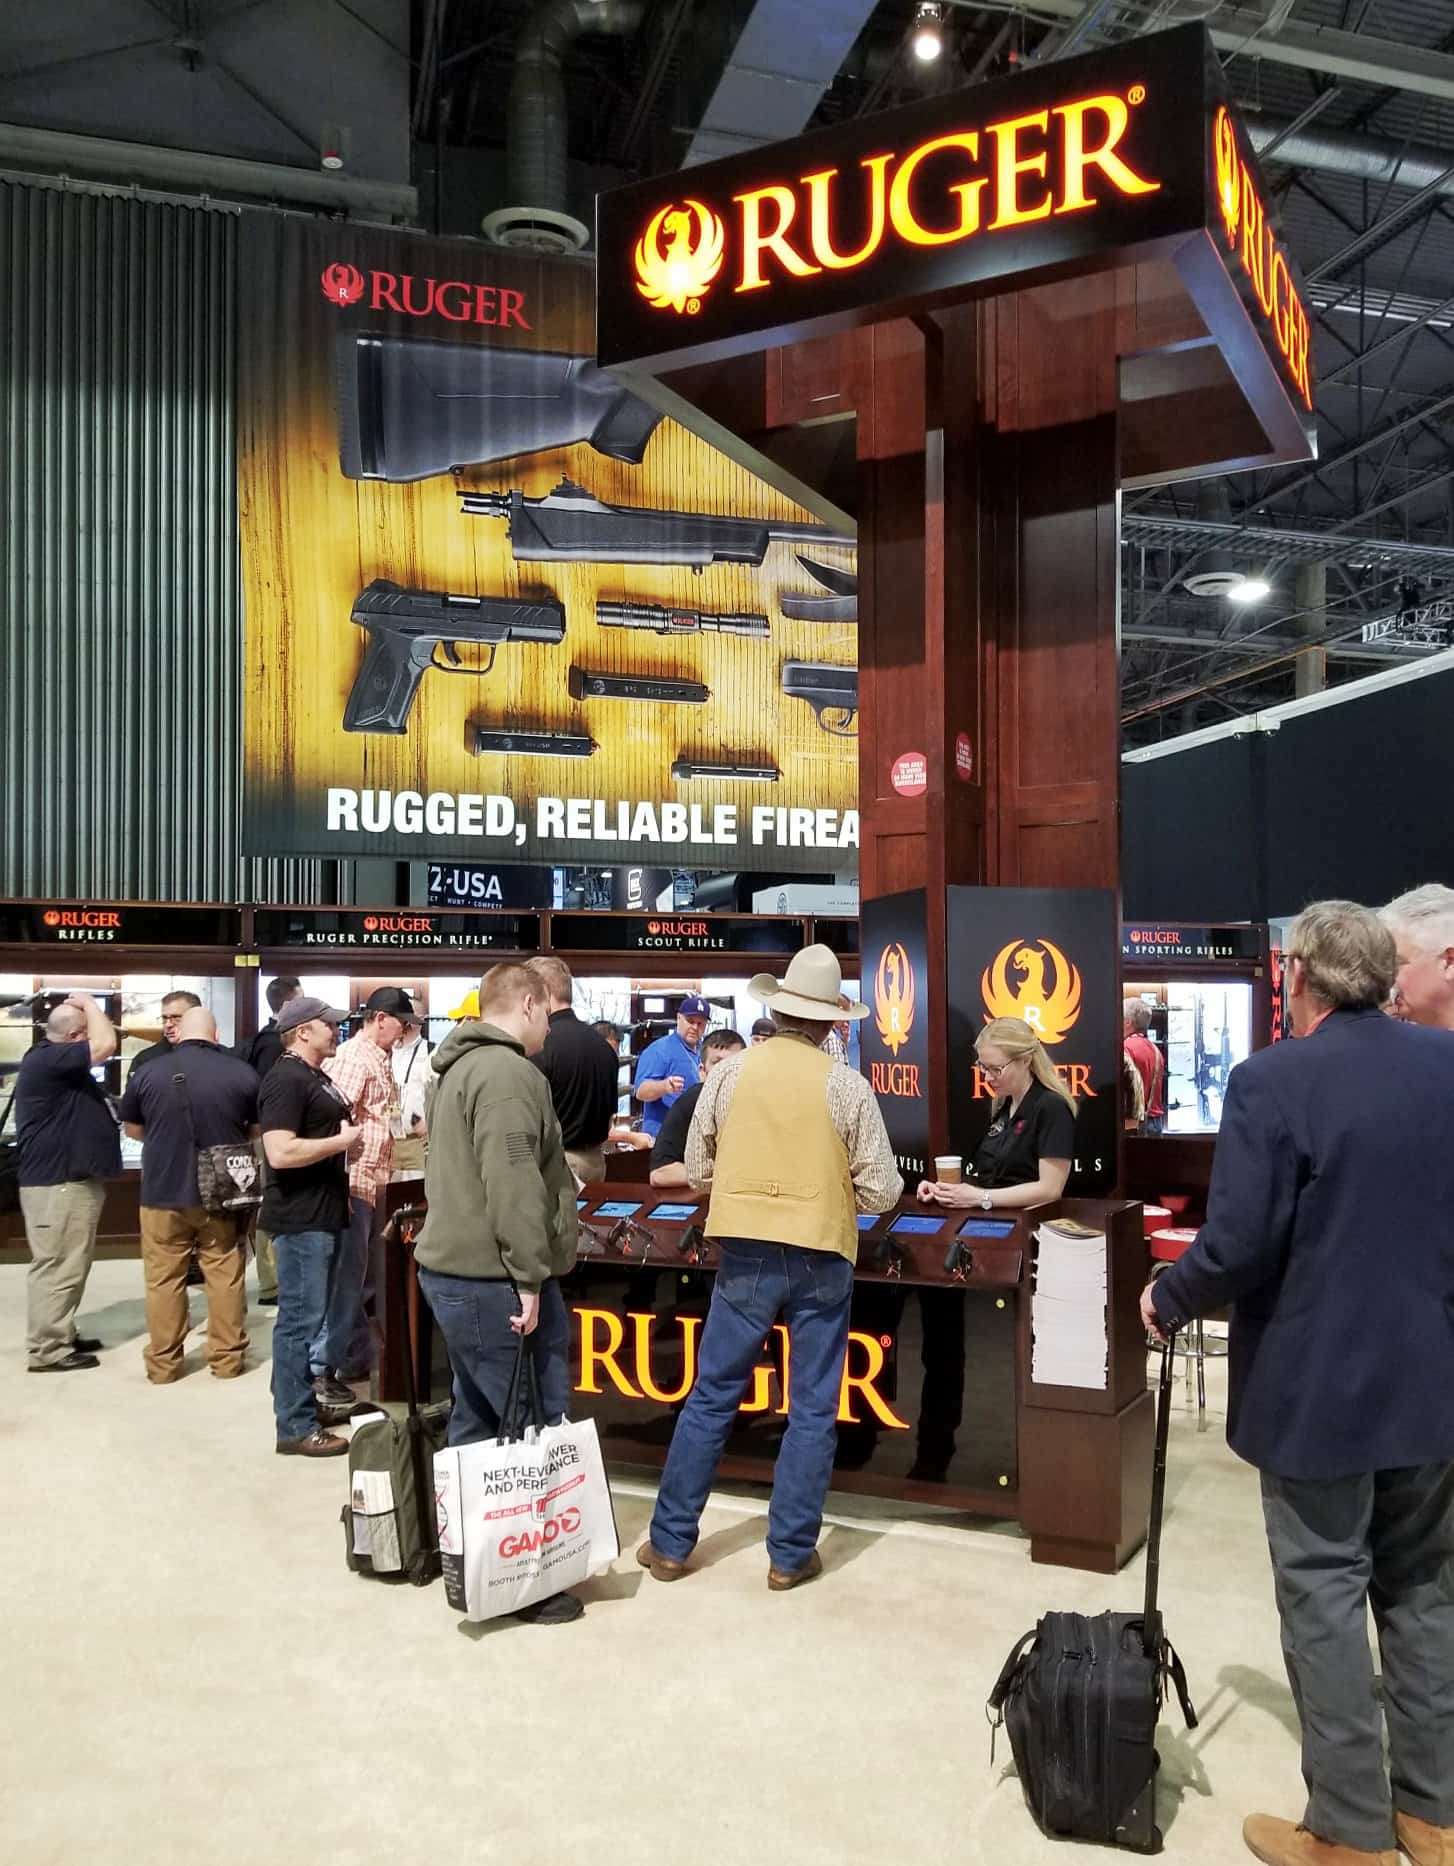 The Ruger booth at the SHOT Show.